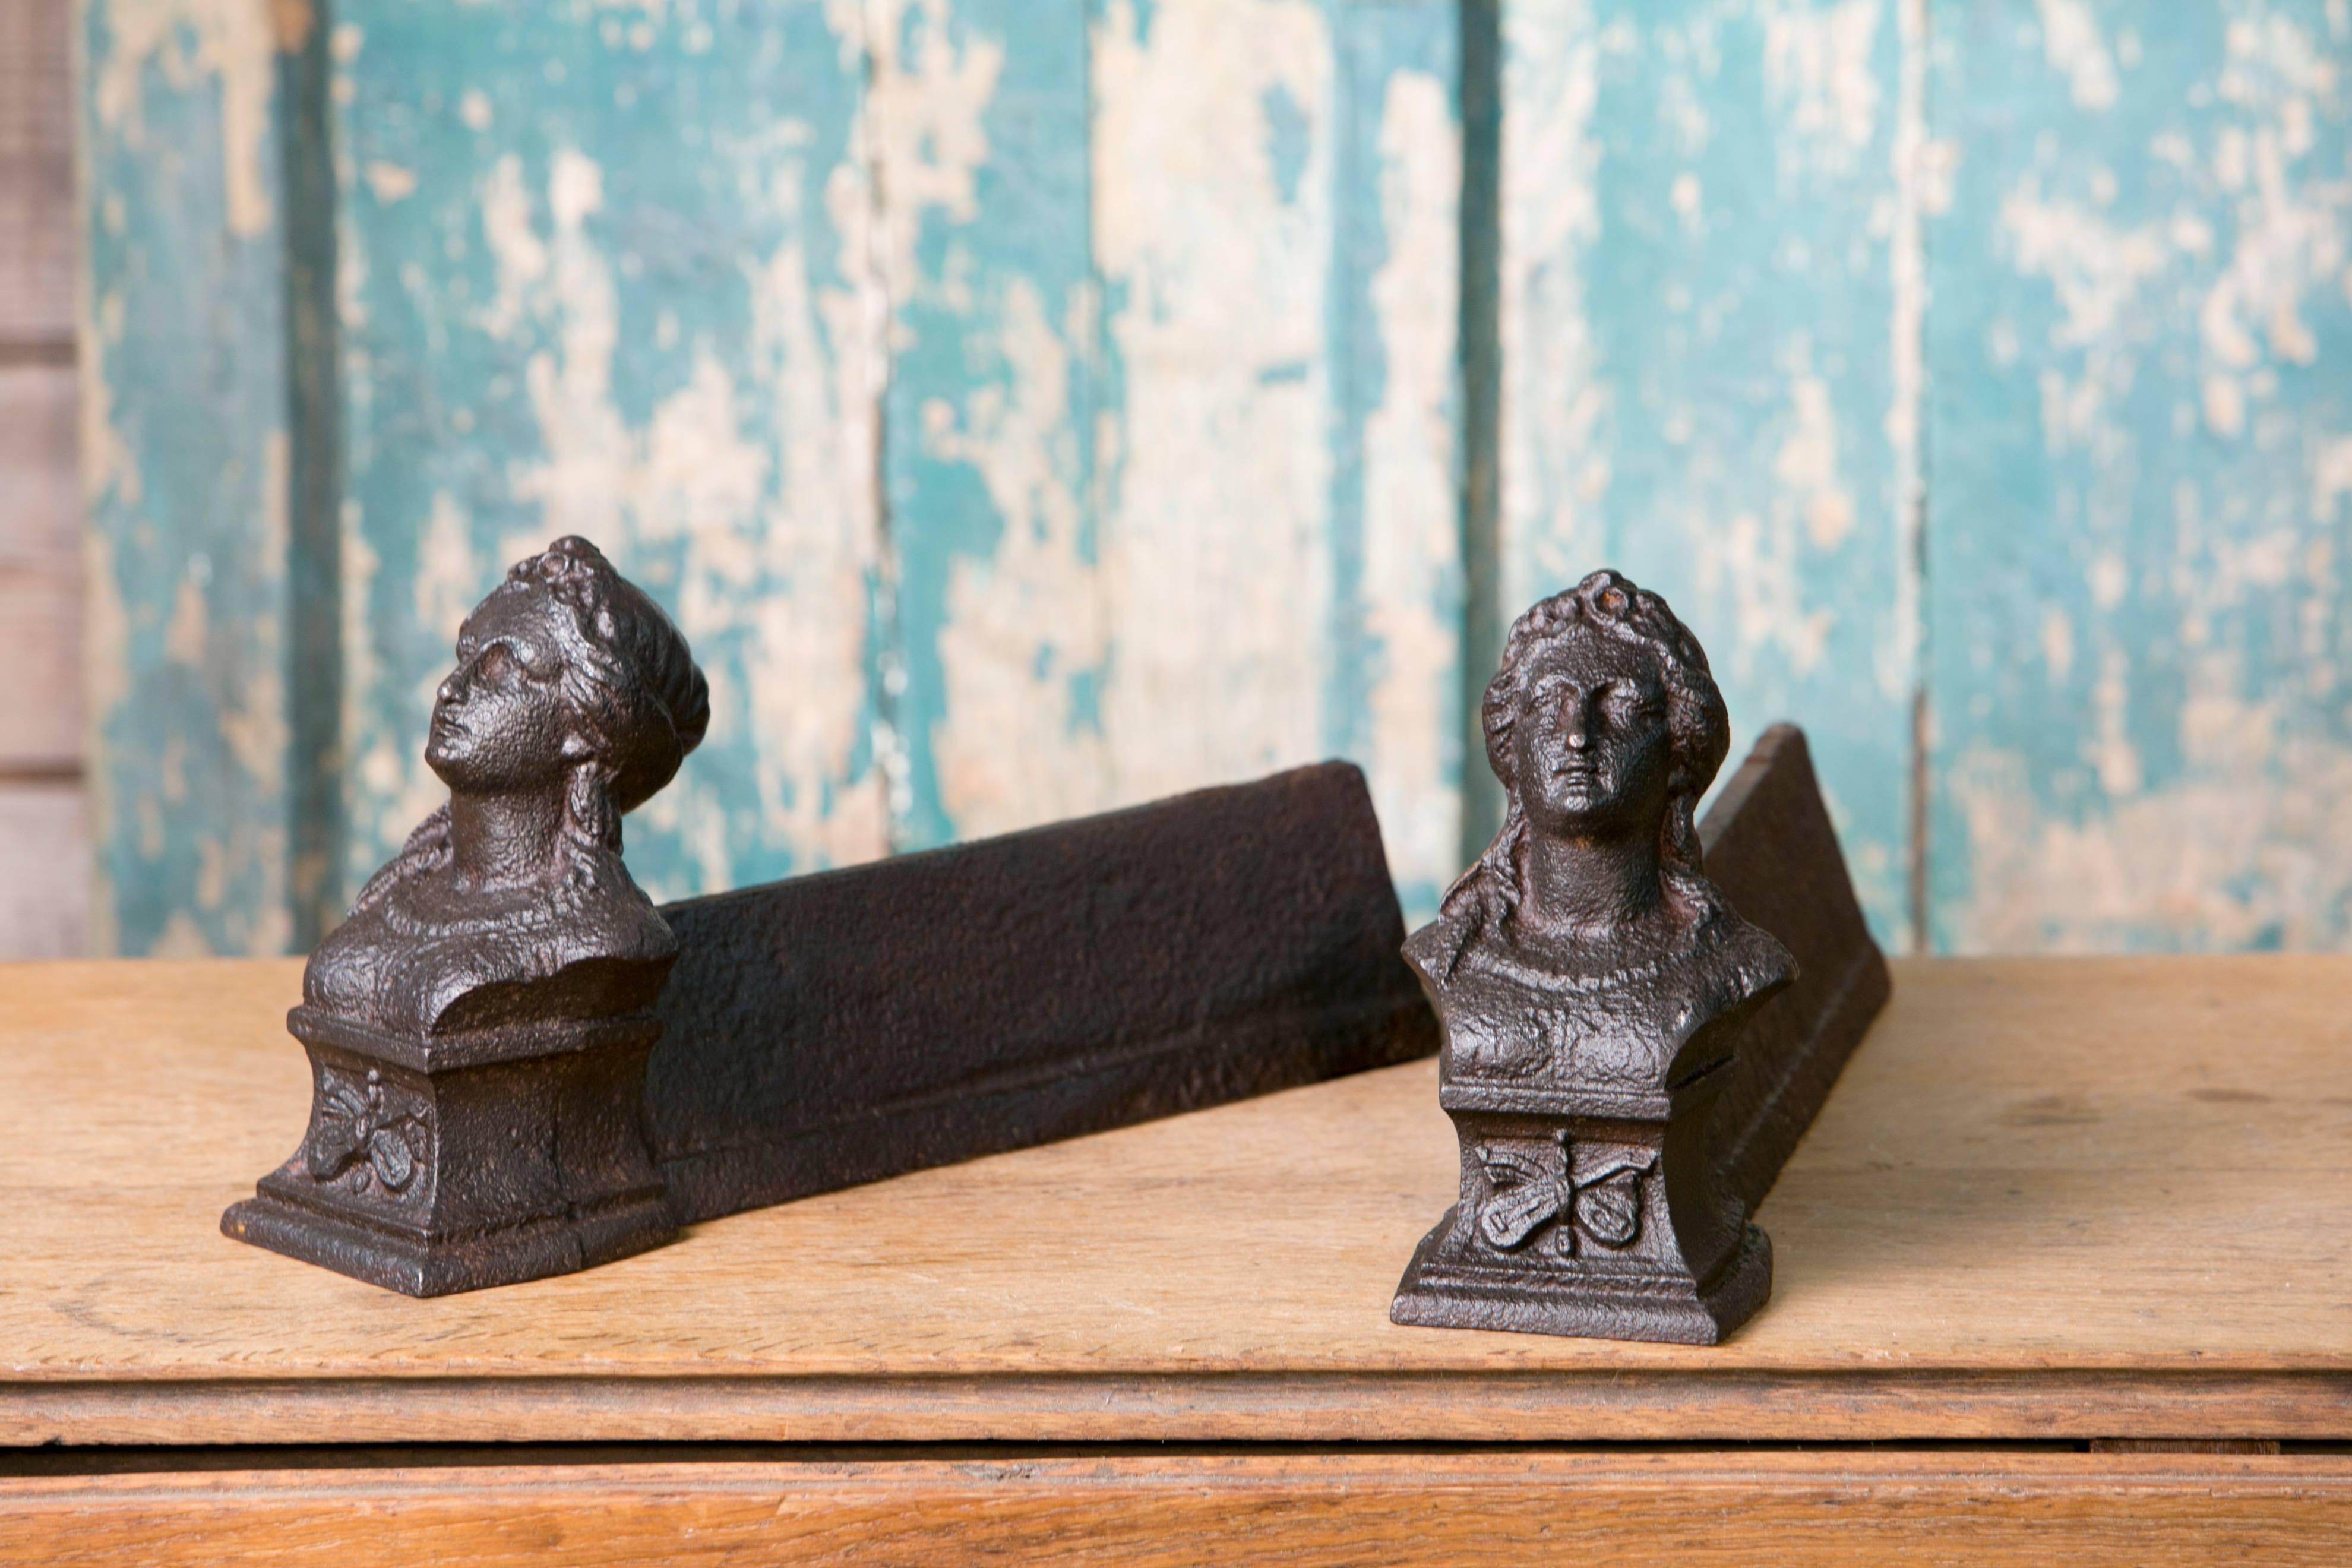 Assorted pairs of figural iron fireplace andirons from France, circa 1800s. Price is for one pair of your choice. Measurement listed is for the pair in image 1.
Pair in image 2 measures 4 inches wide x 14 deep x 6.25 high.
Pair in image 3 measures